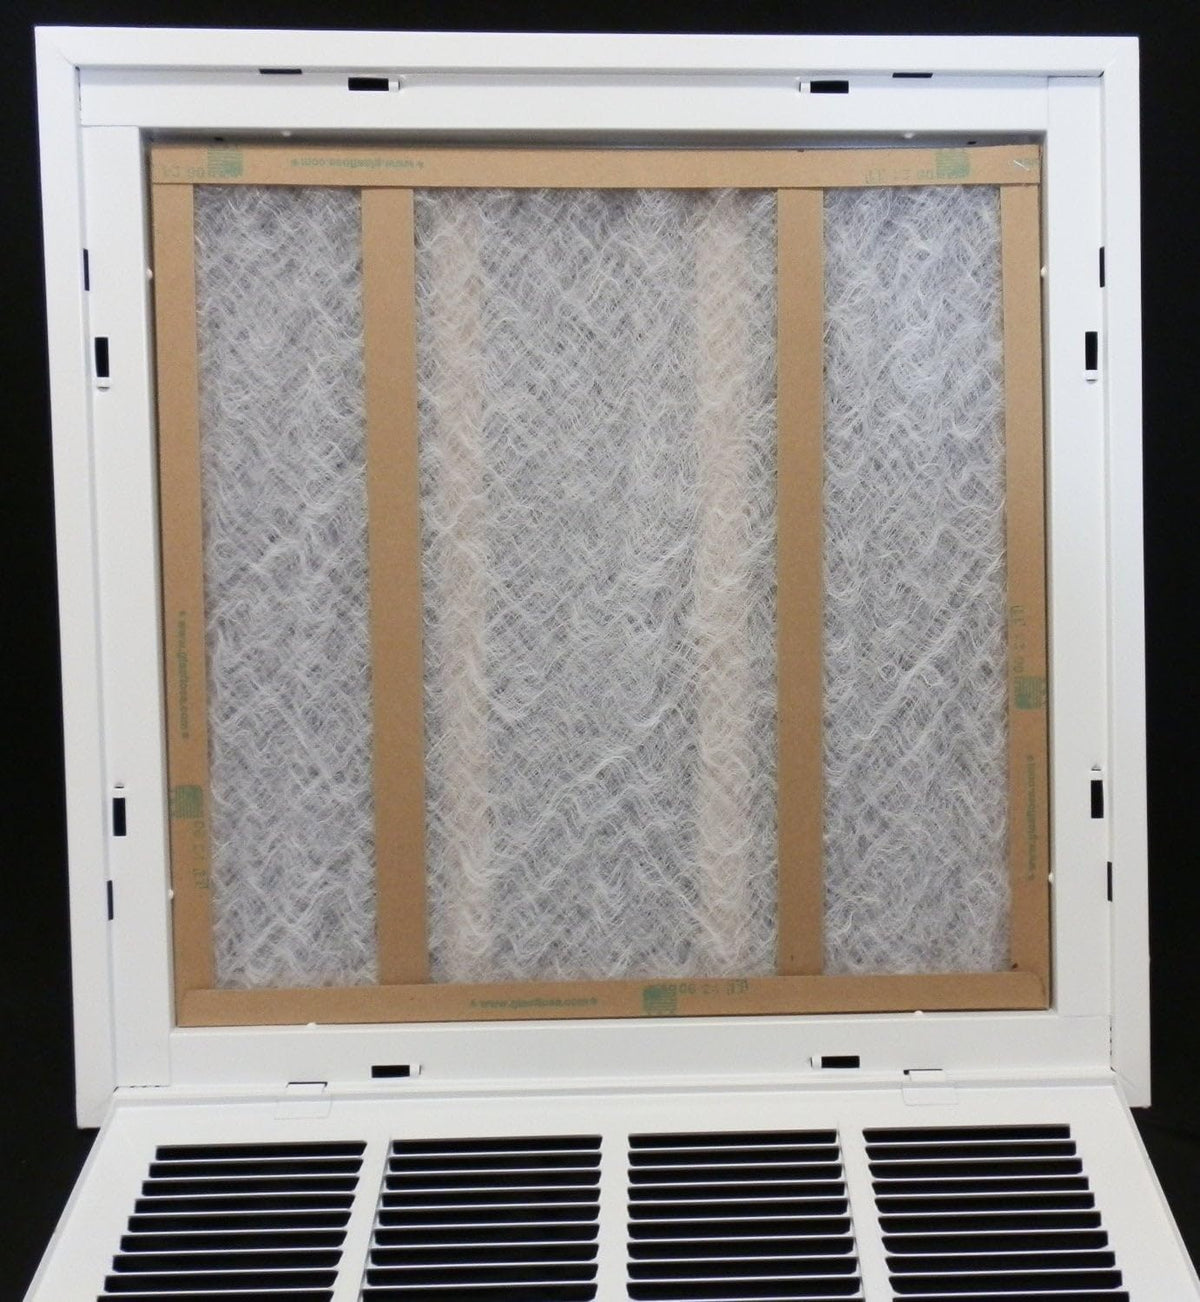 14&quot; X 14&quot; Steel Return Air Filter Grille for 1&quot; Filter - Fixed Hinged - [Outer Dimensions: 16 5/8&quot; X 16 5/8&quot;]